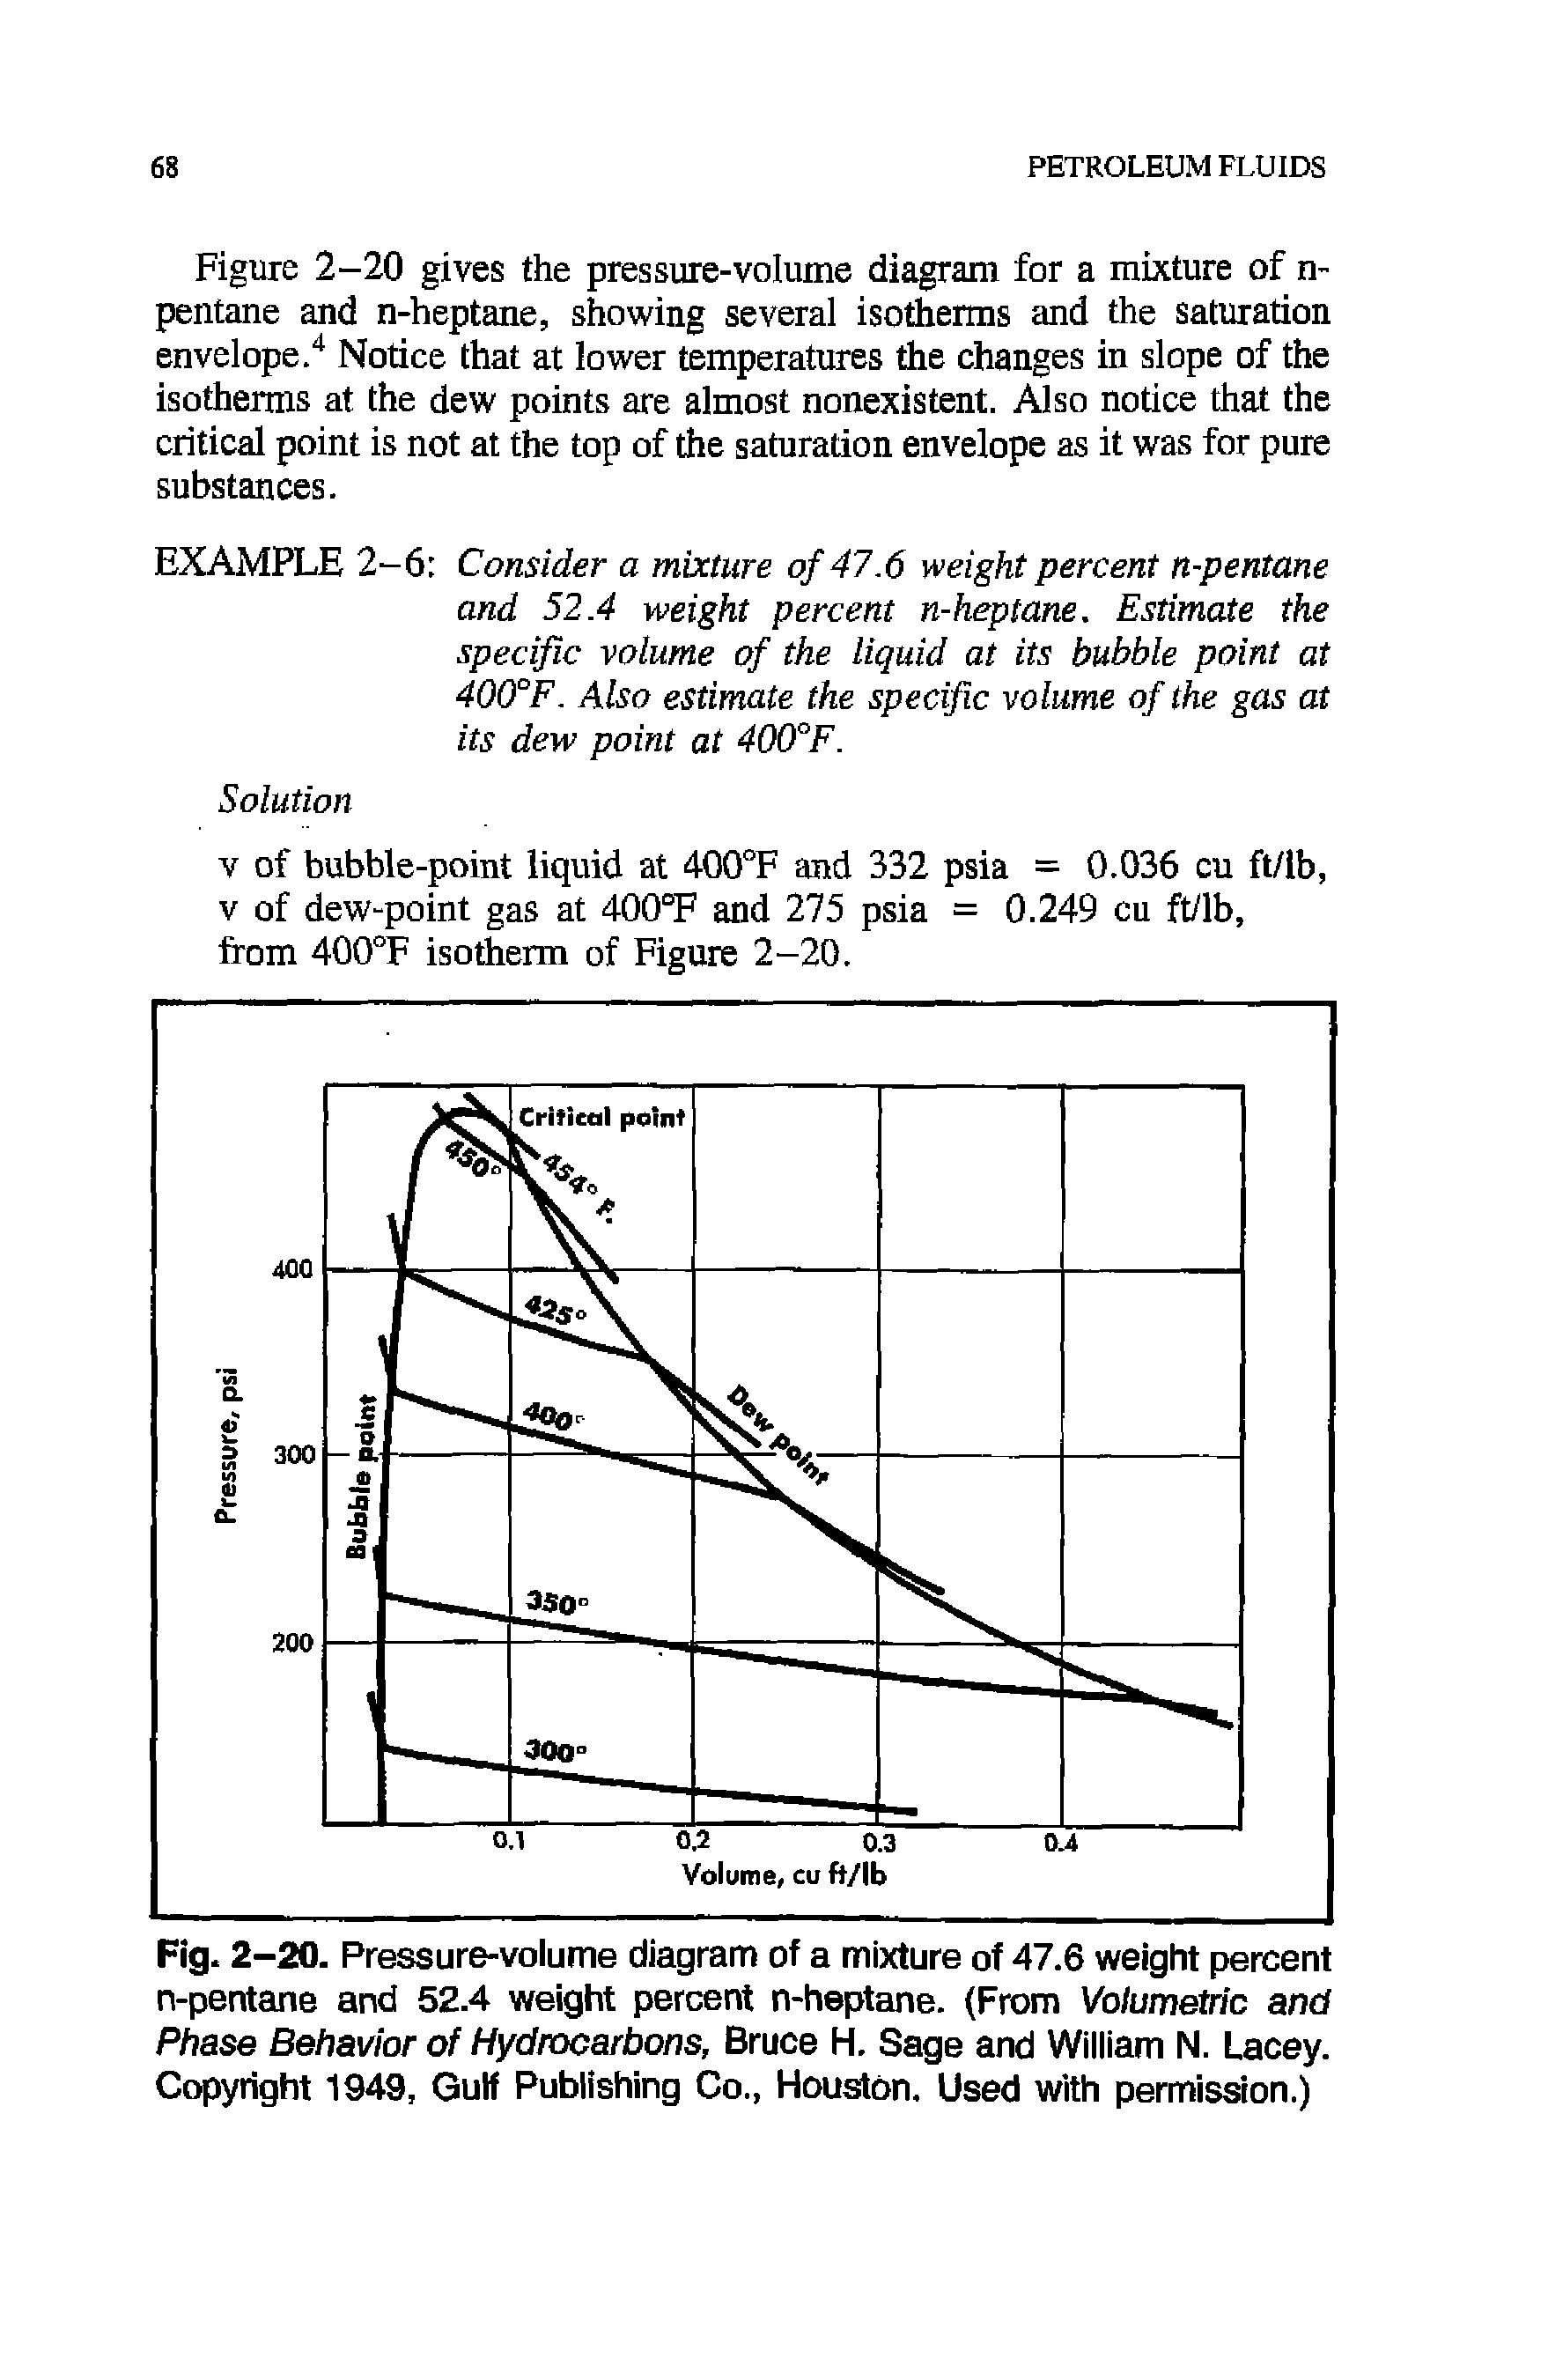 Fig. 2-20. Pressure-volume diagram of a mixture of 47.6 weight percent n-pentane and 52.4 weight percent n-heptane. (From Volumetric and Phase Behavior of Hydrocarbons, Bruce H. Sage and William N. Lacey. Copyright 1949, Gulf Publishing Co., Houston. Used with permission.)...